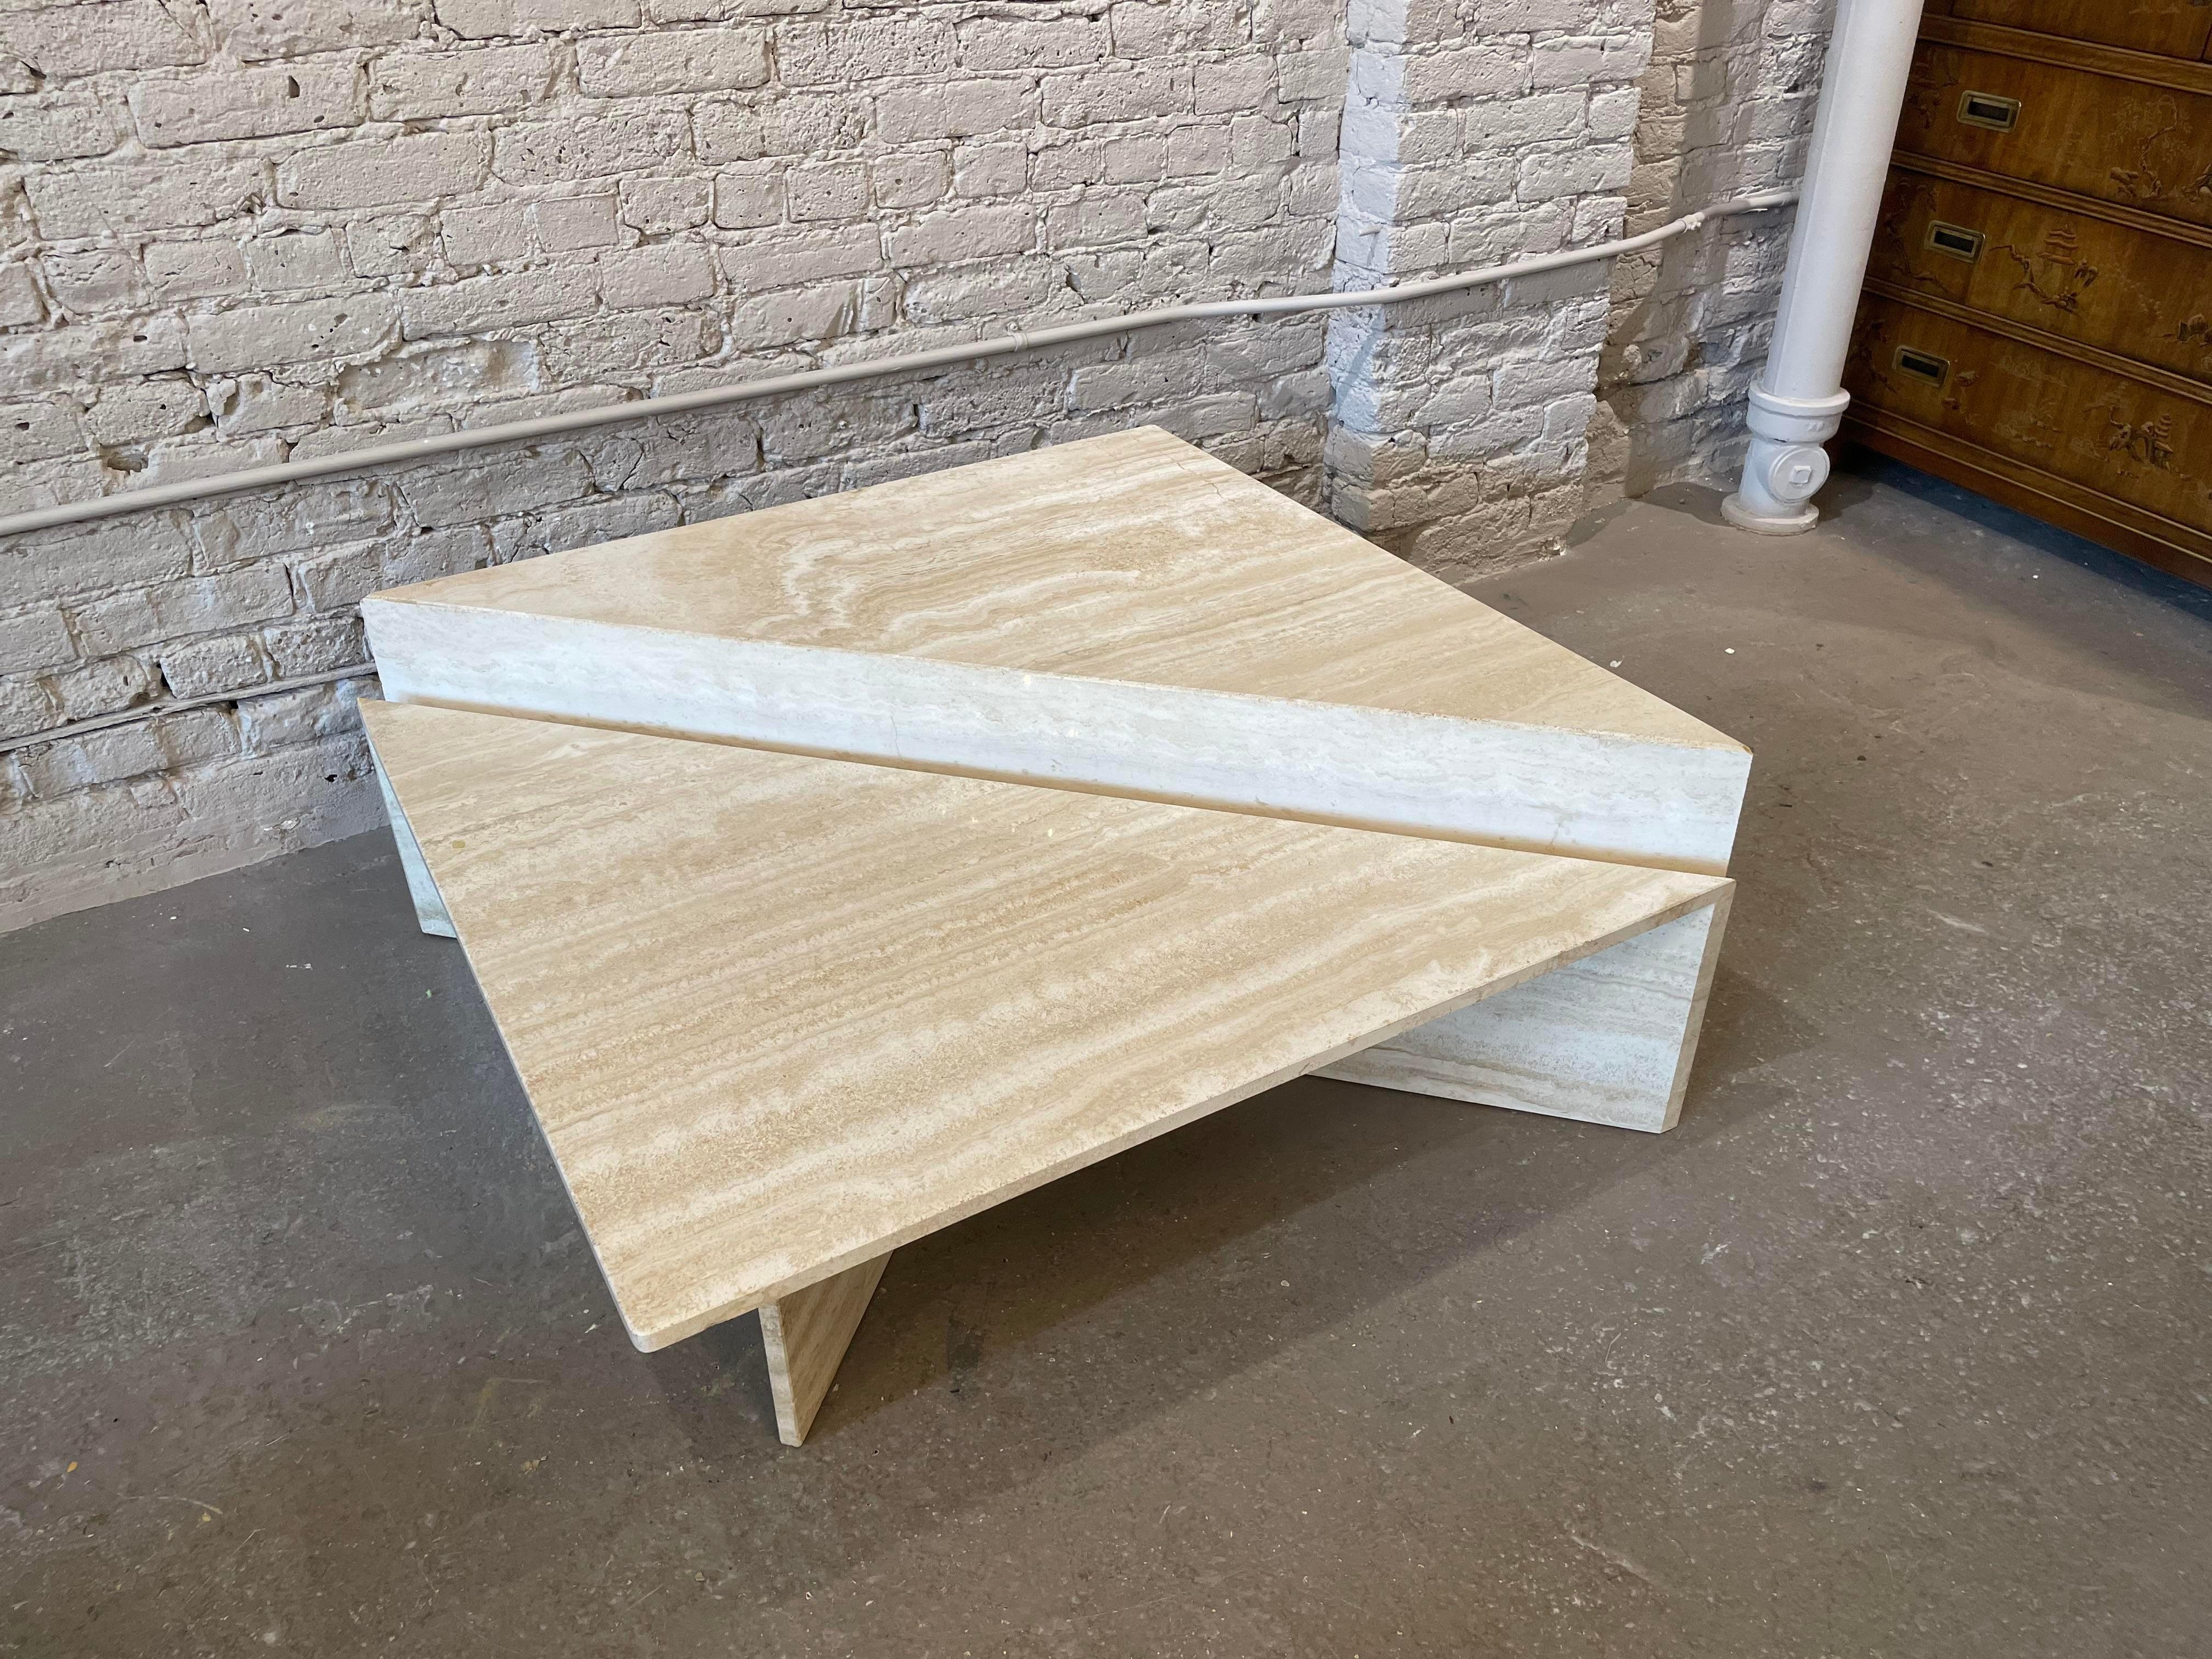 Such a good design. Two triangles that form a square 39” by 39”. The taller triangle is 16” in height and the shorter is 13”. Place them as you like.